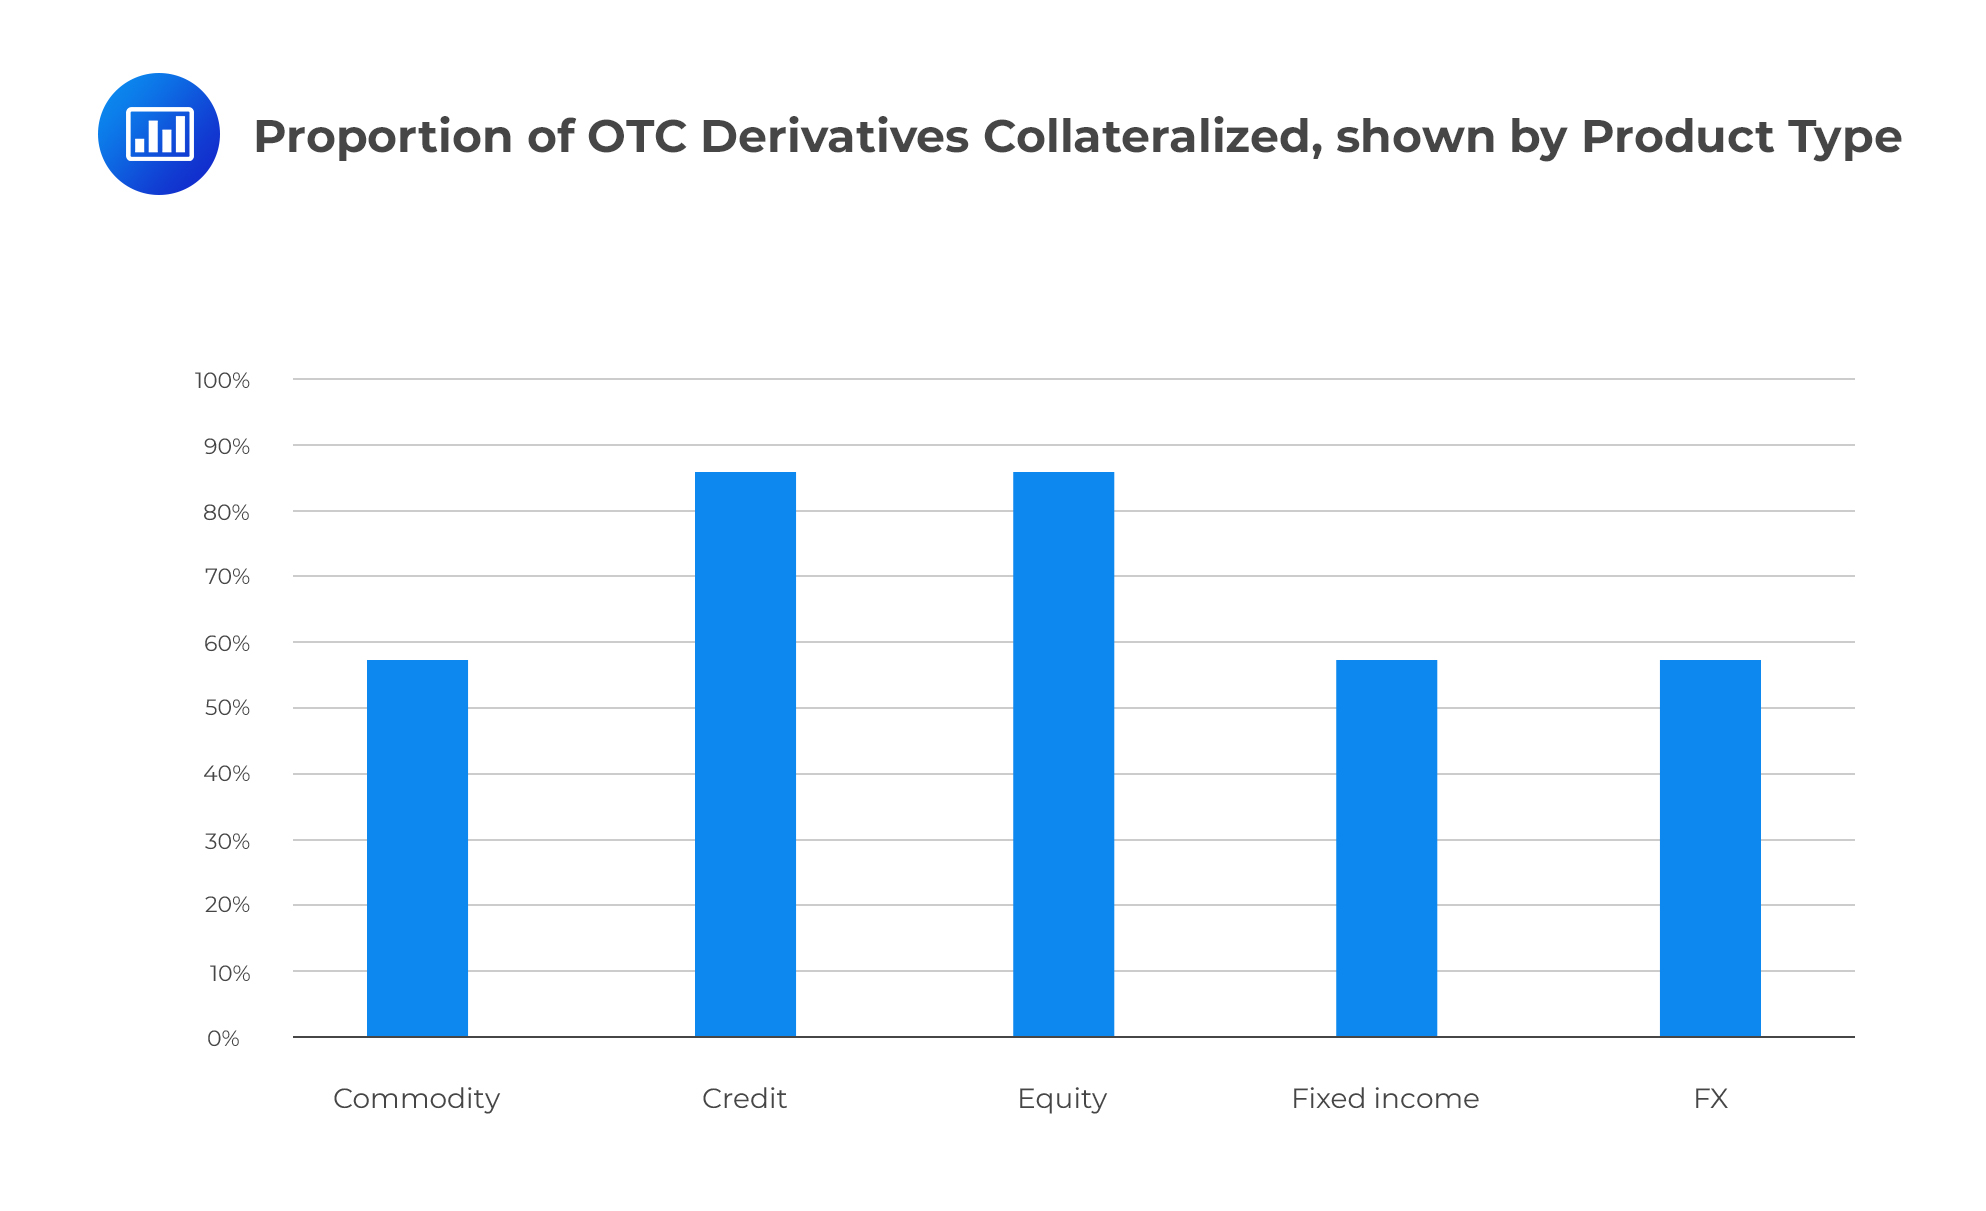 Proportion of OTC Derivatives Collateralized, shown by Product Type